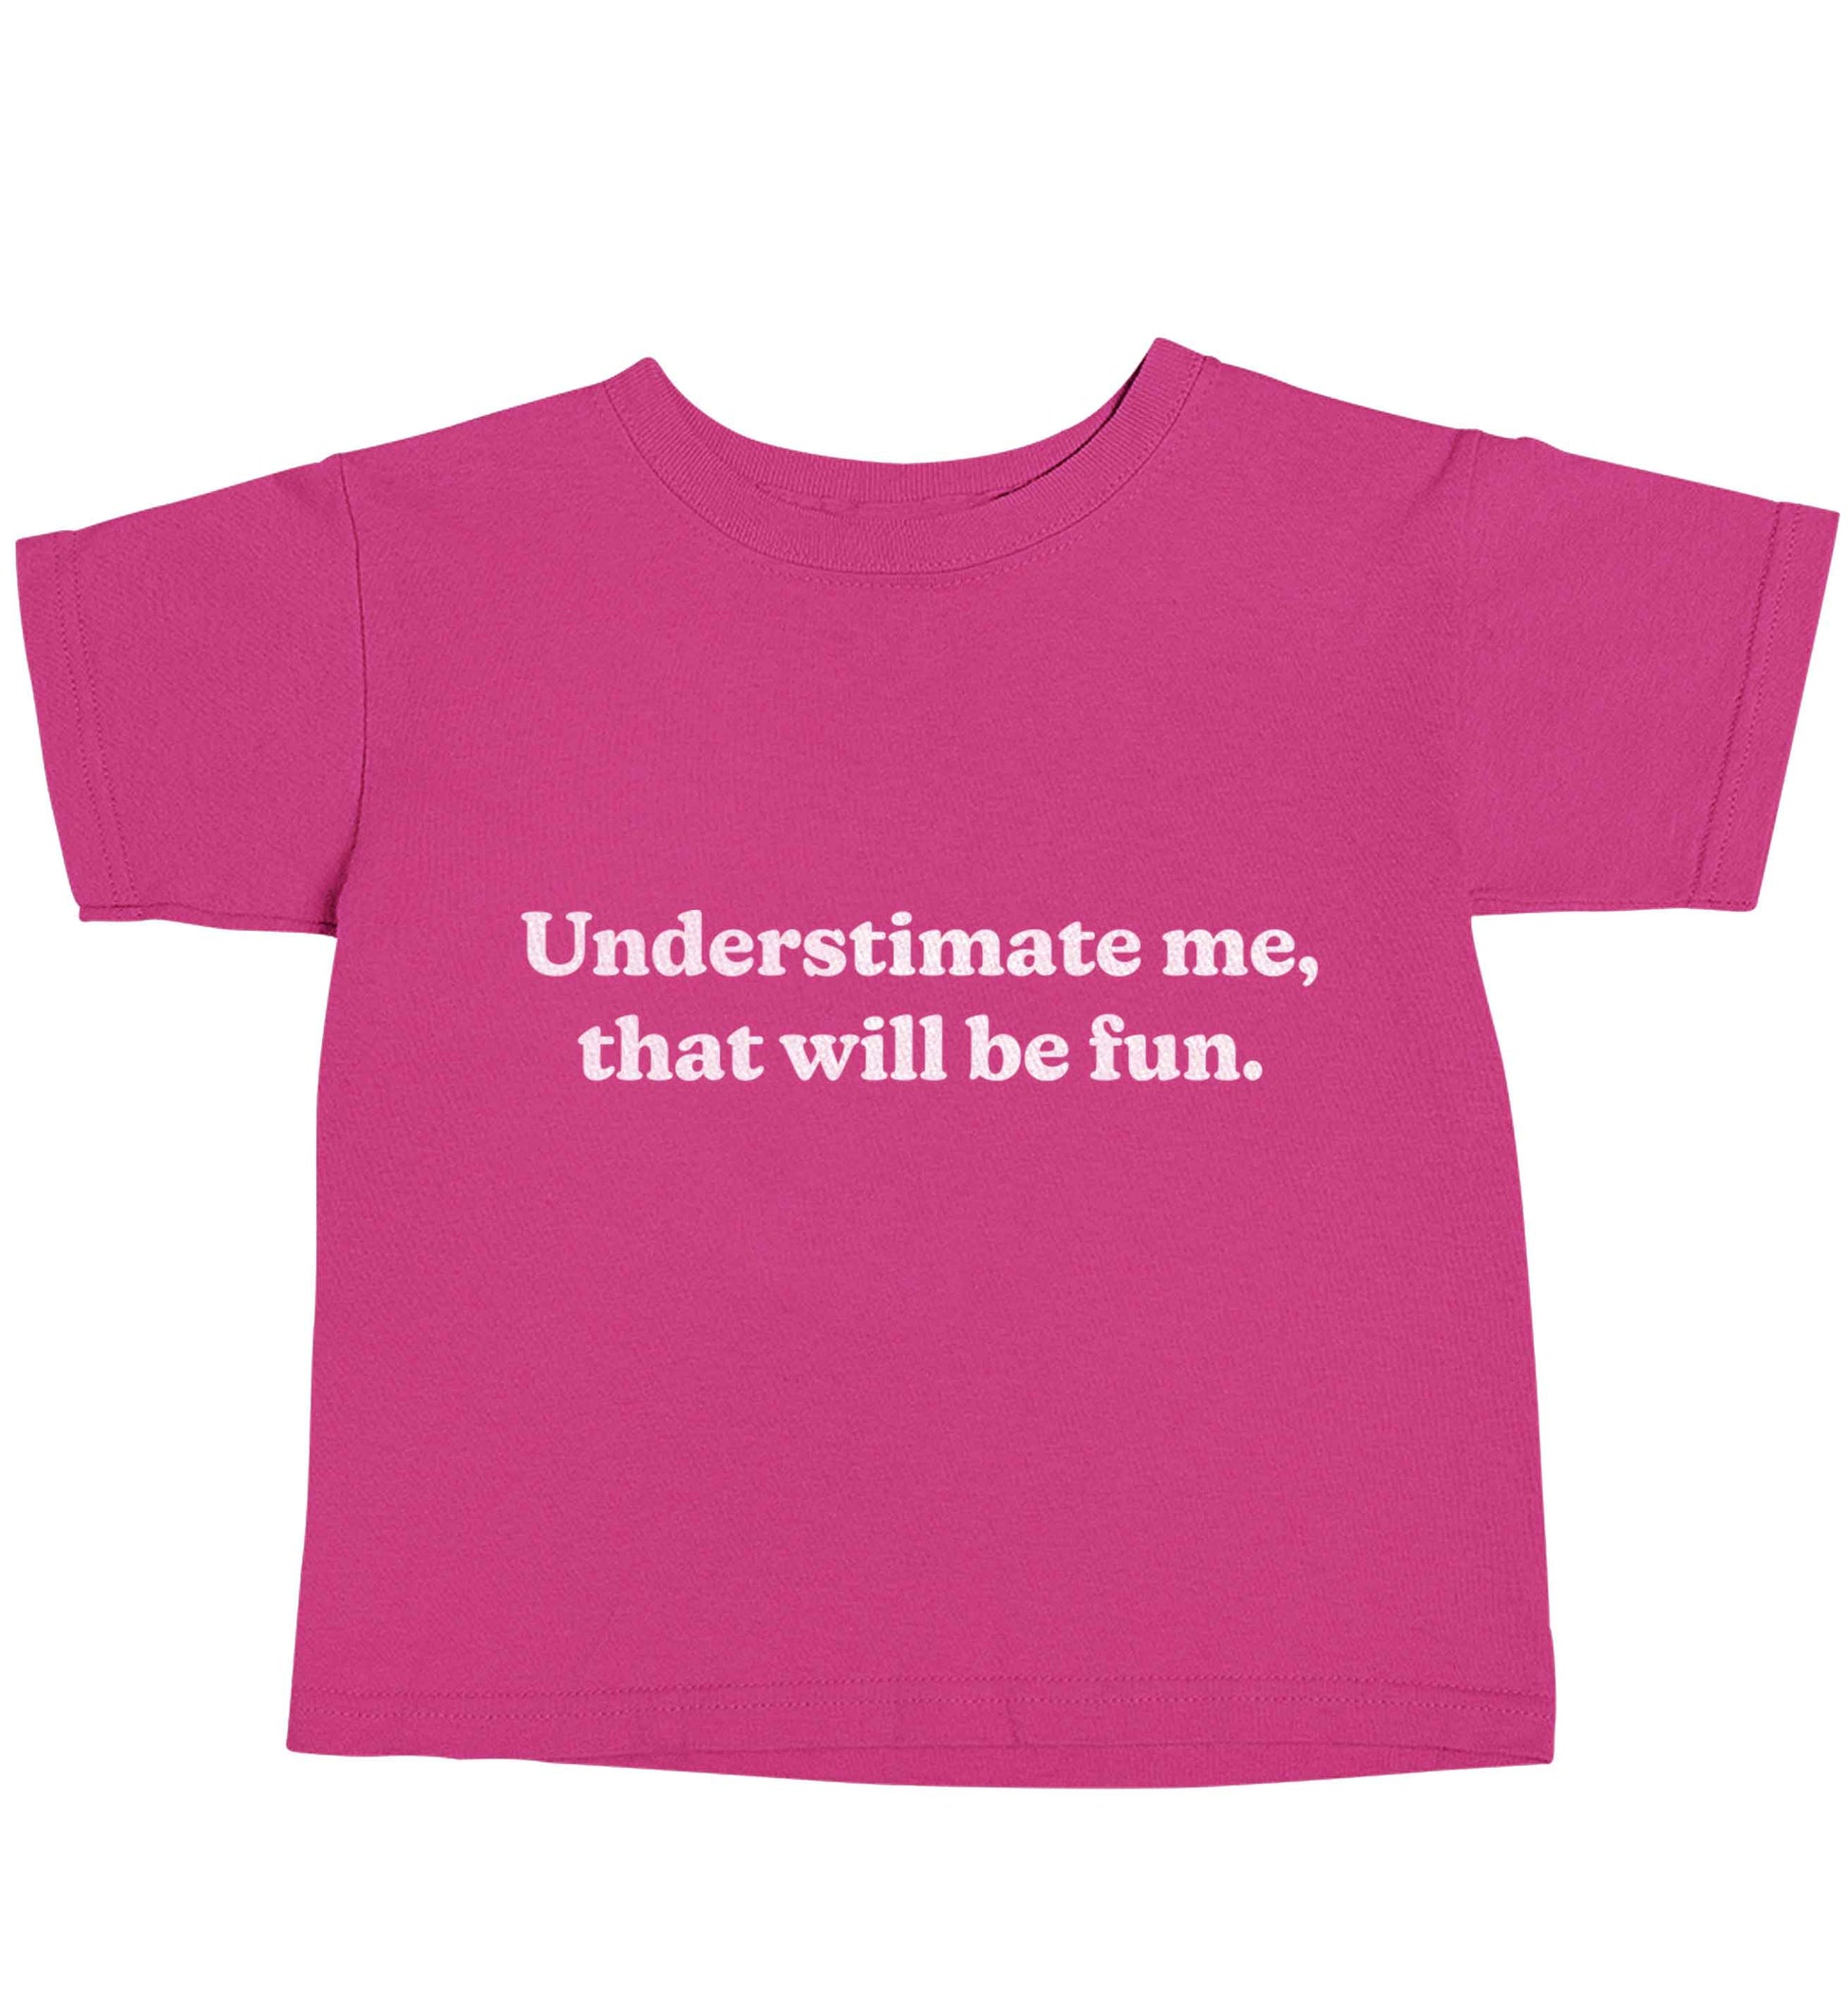 Underestimate me that will be fun pink baby toddler Tshirt 2 Years